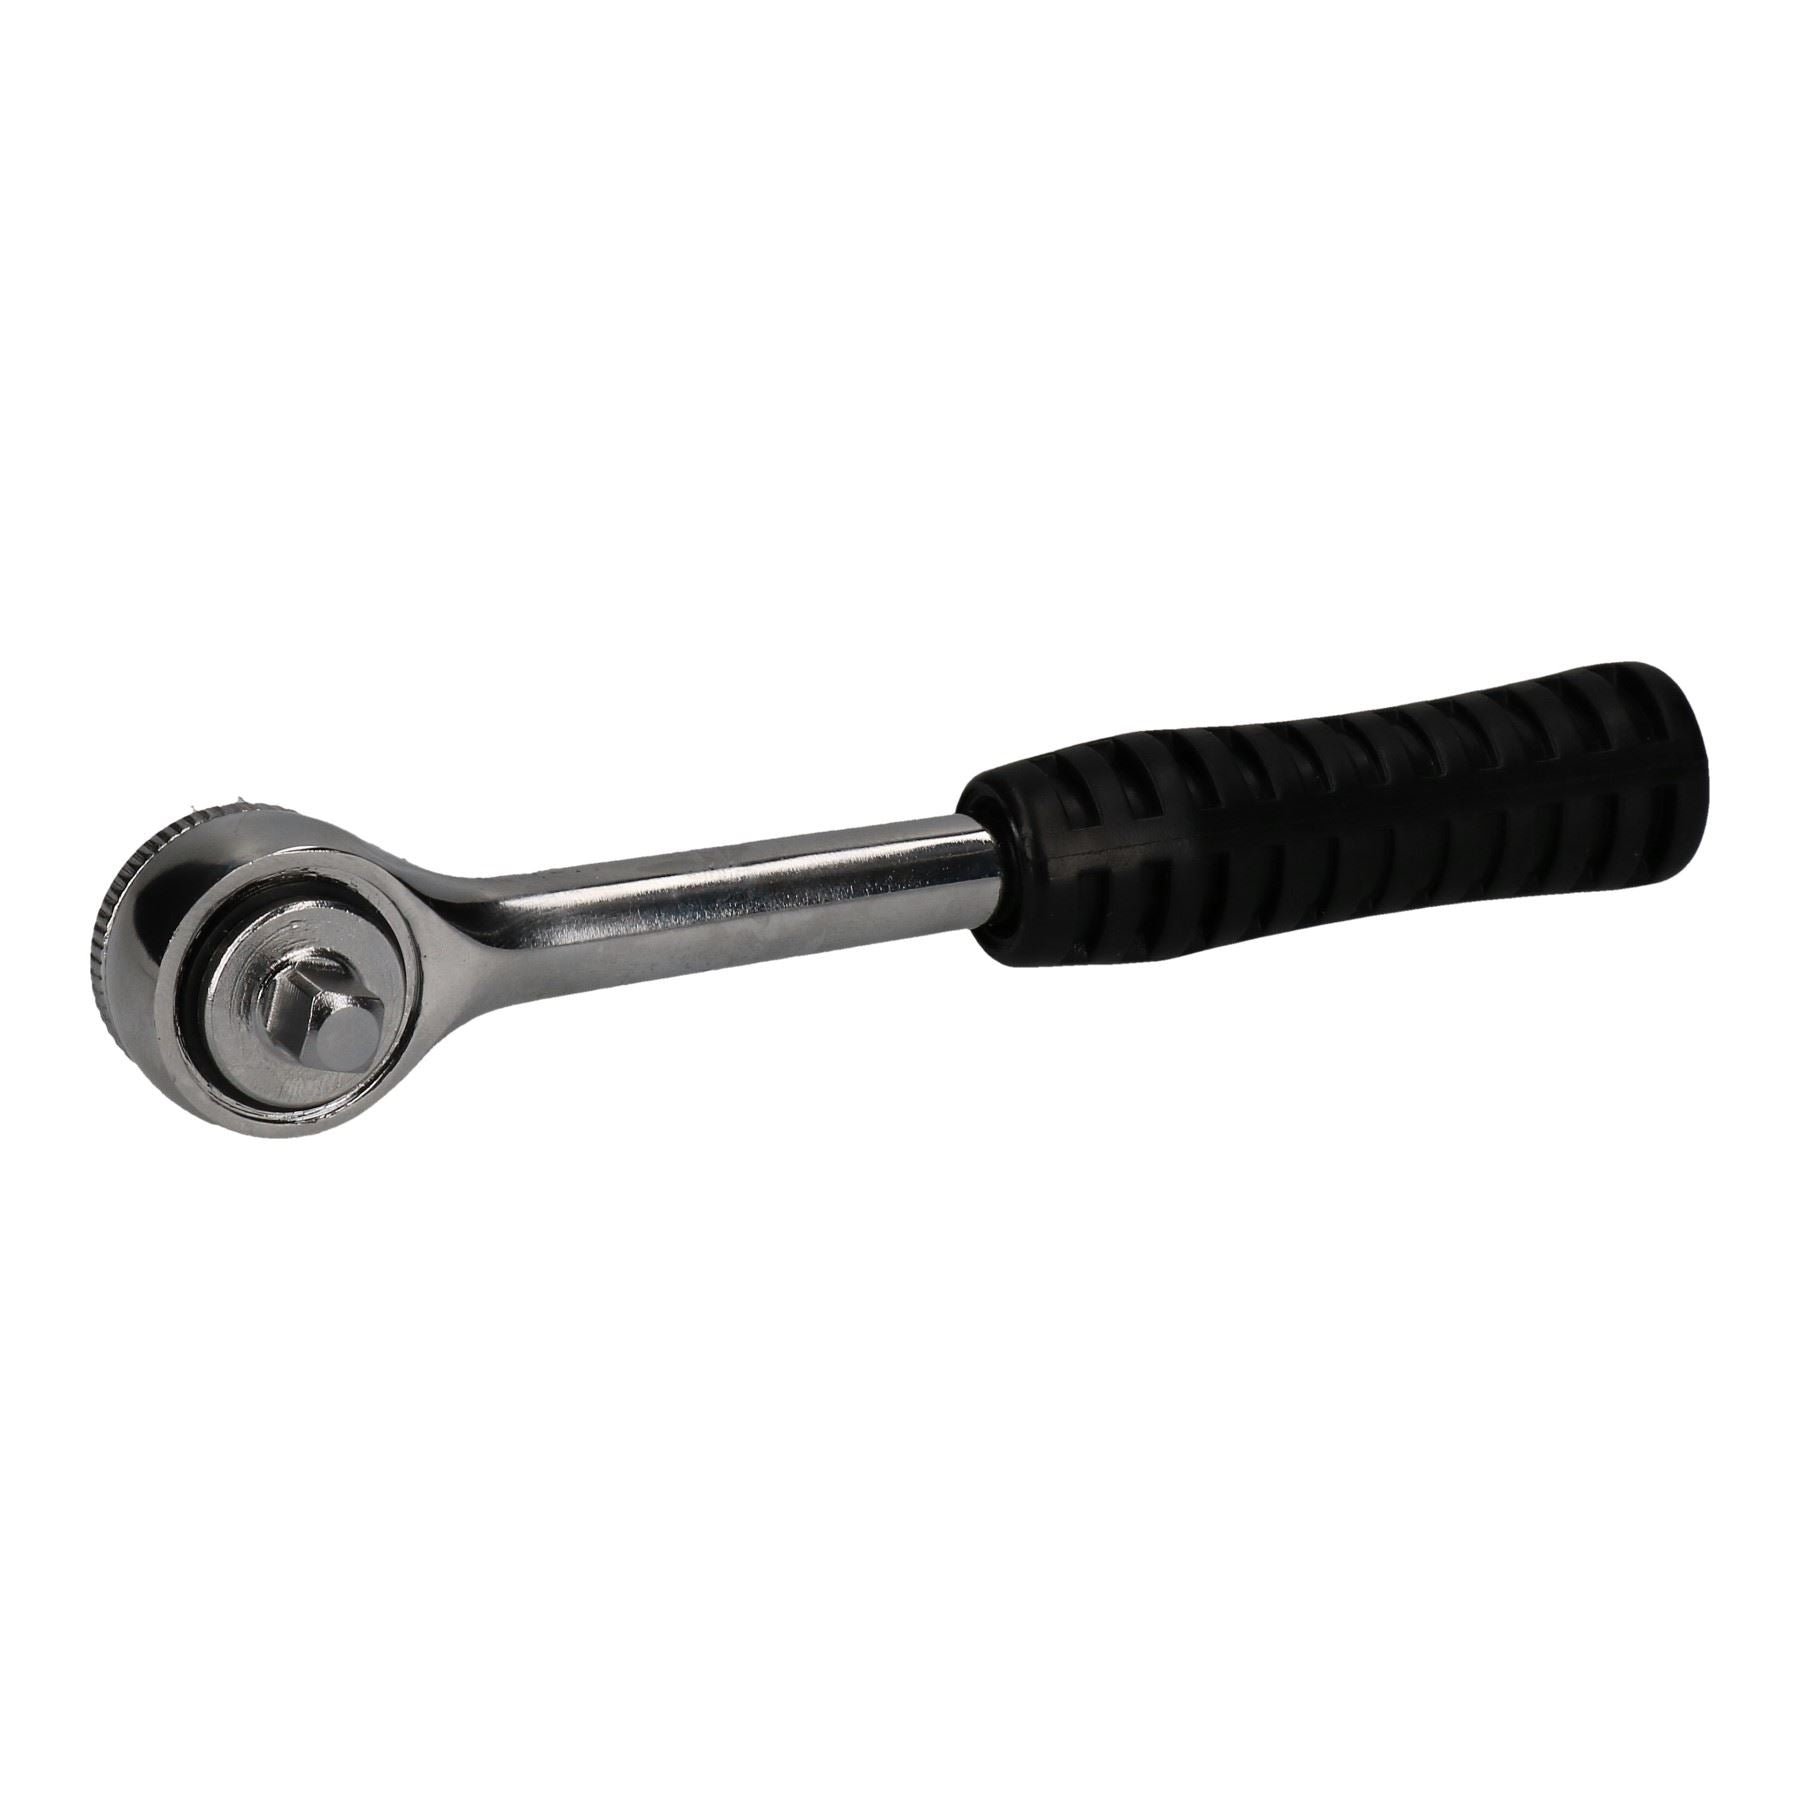 1/4" Drive Straight Ratchet With Rubber Grip Handle 45 Teeth Reversible